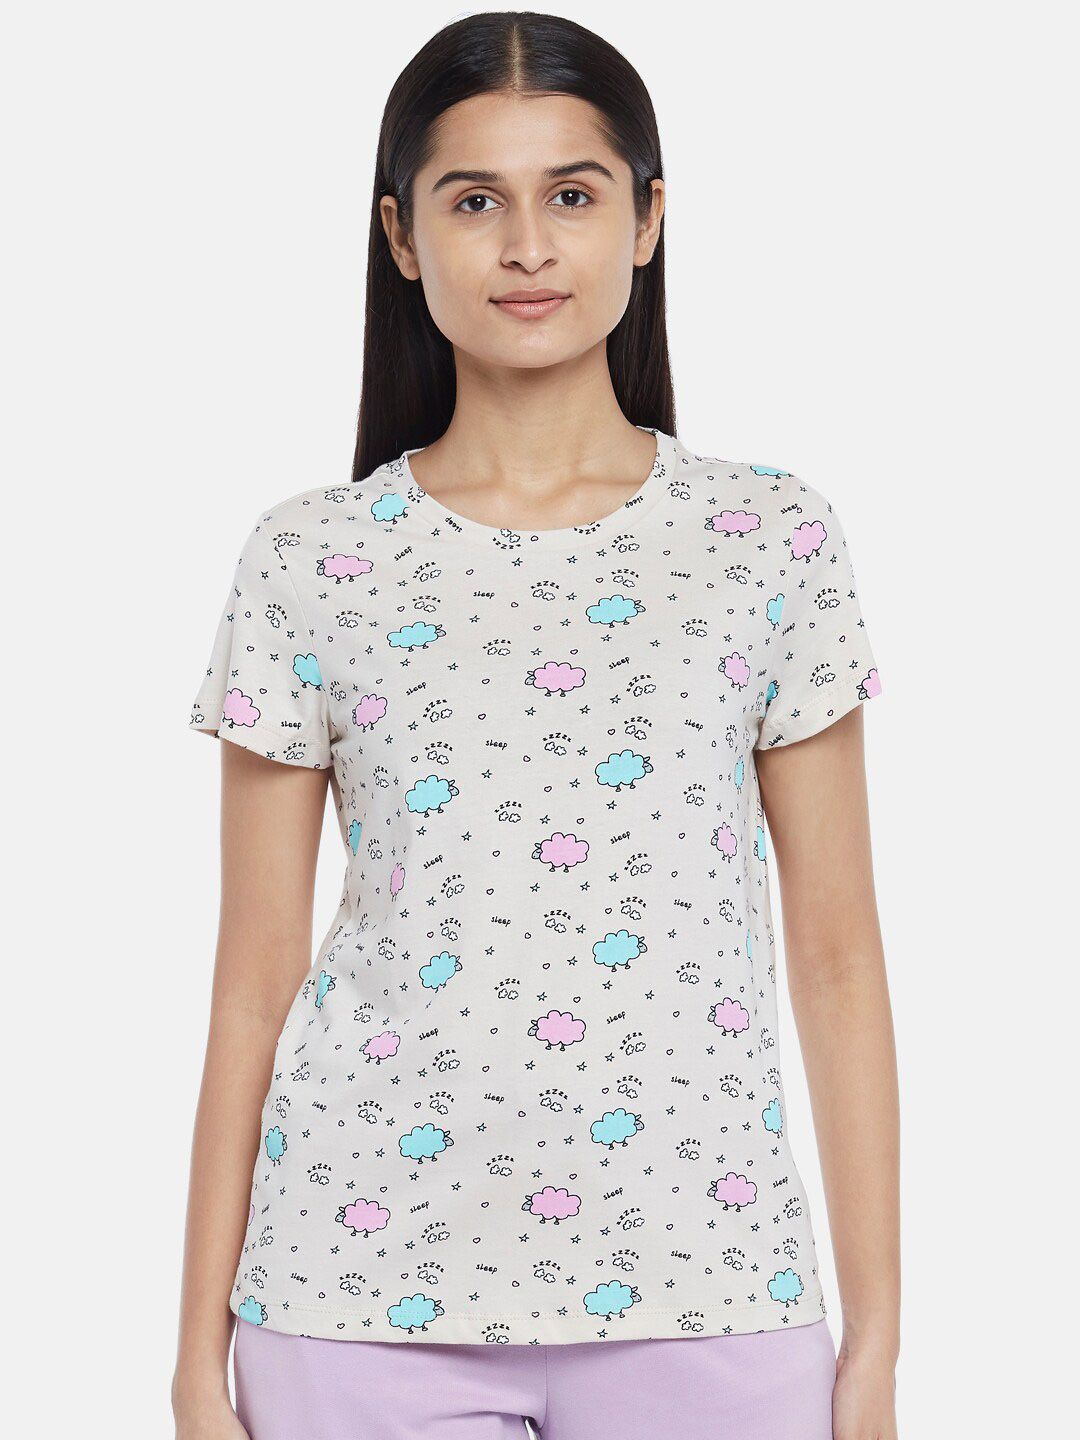 Dreamz by Pantaloons Women Grey & Blue Print Pure Cotton Lounge T-shirt Price in India